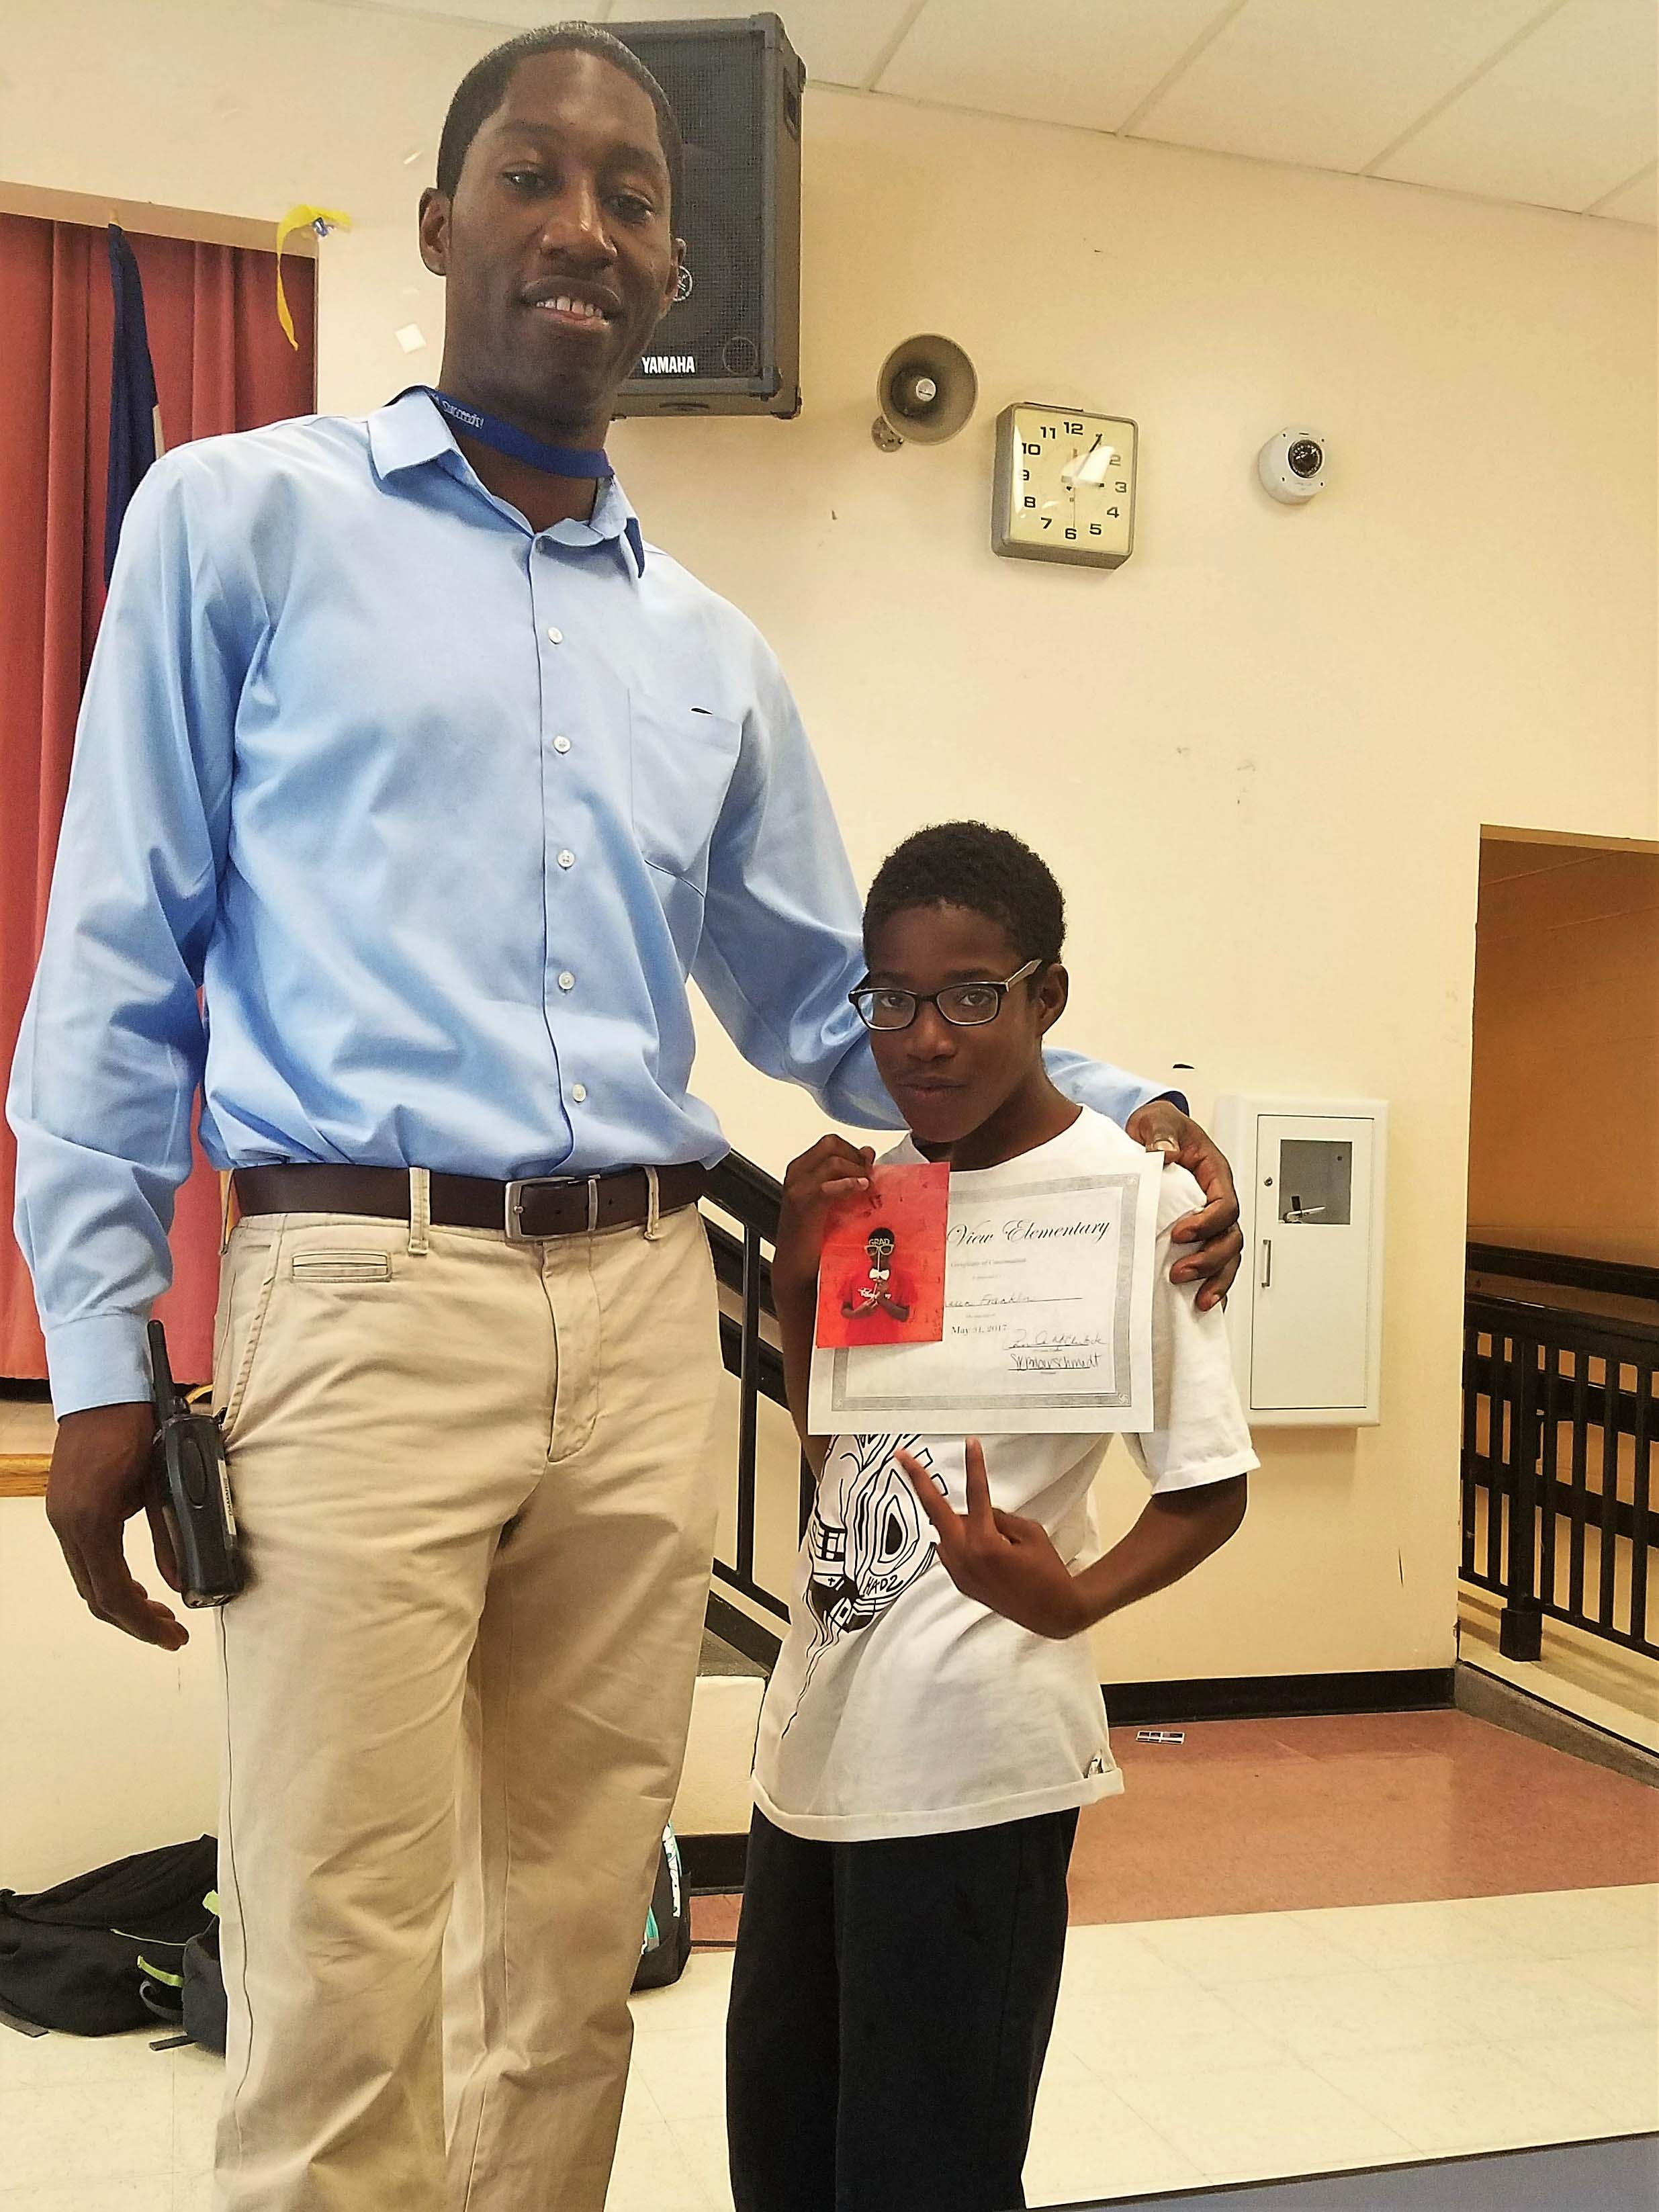 Terrence standing with student